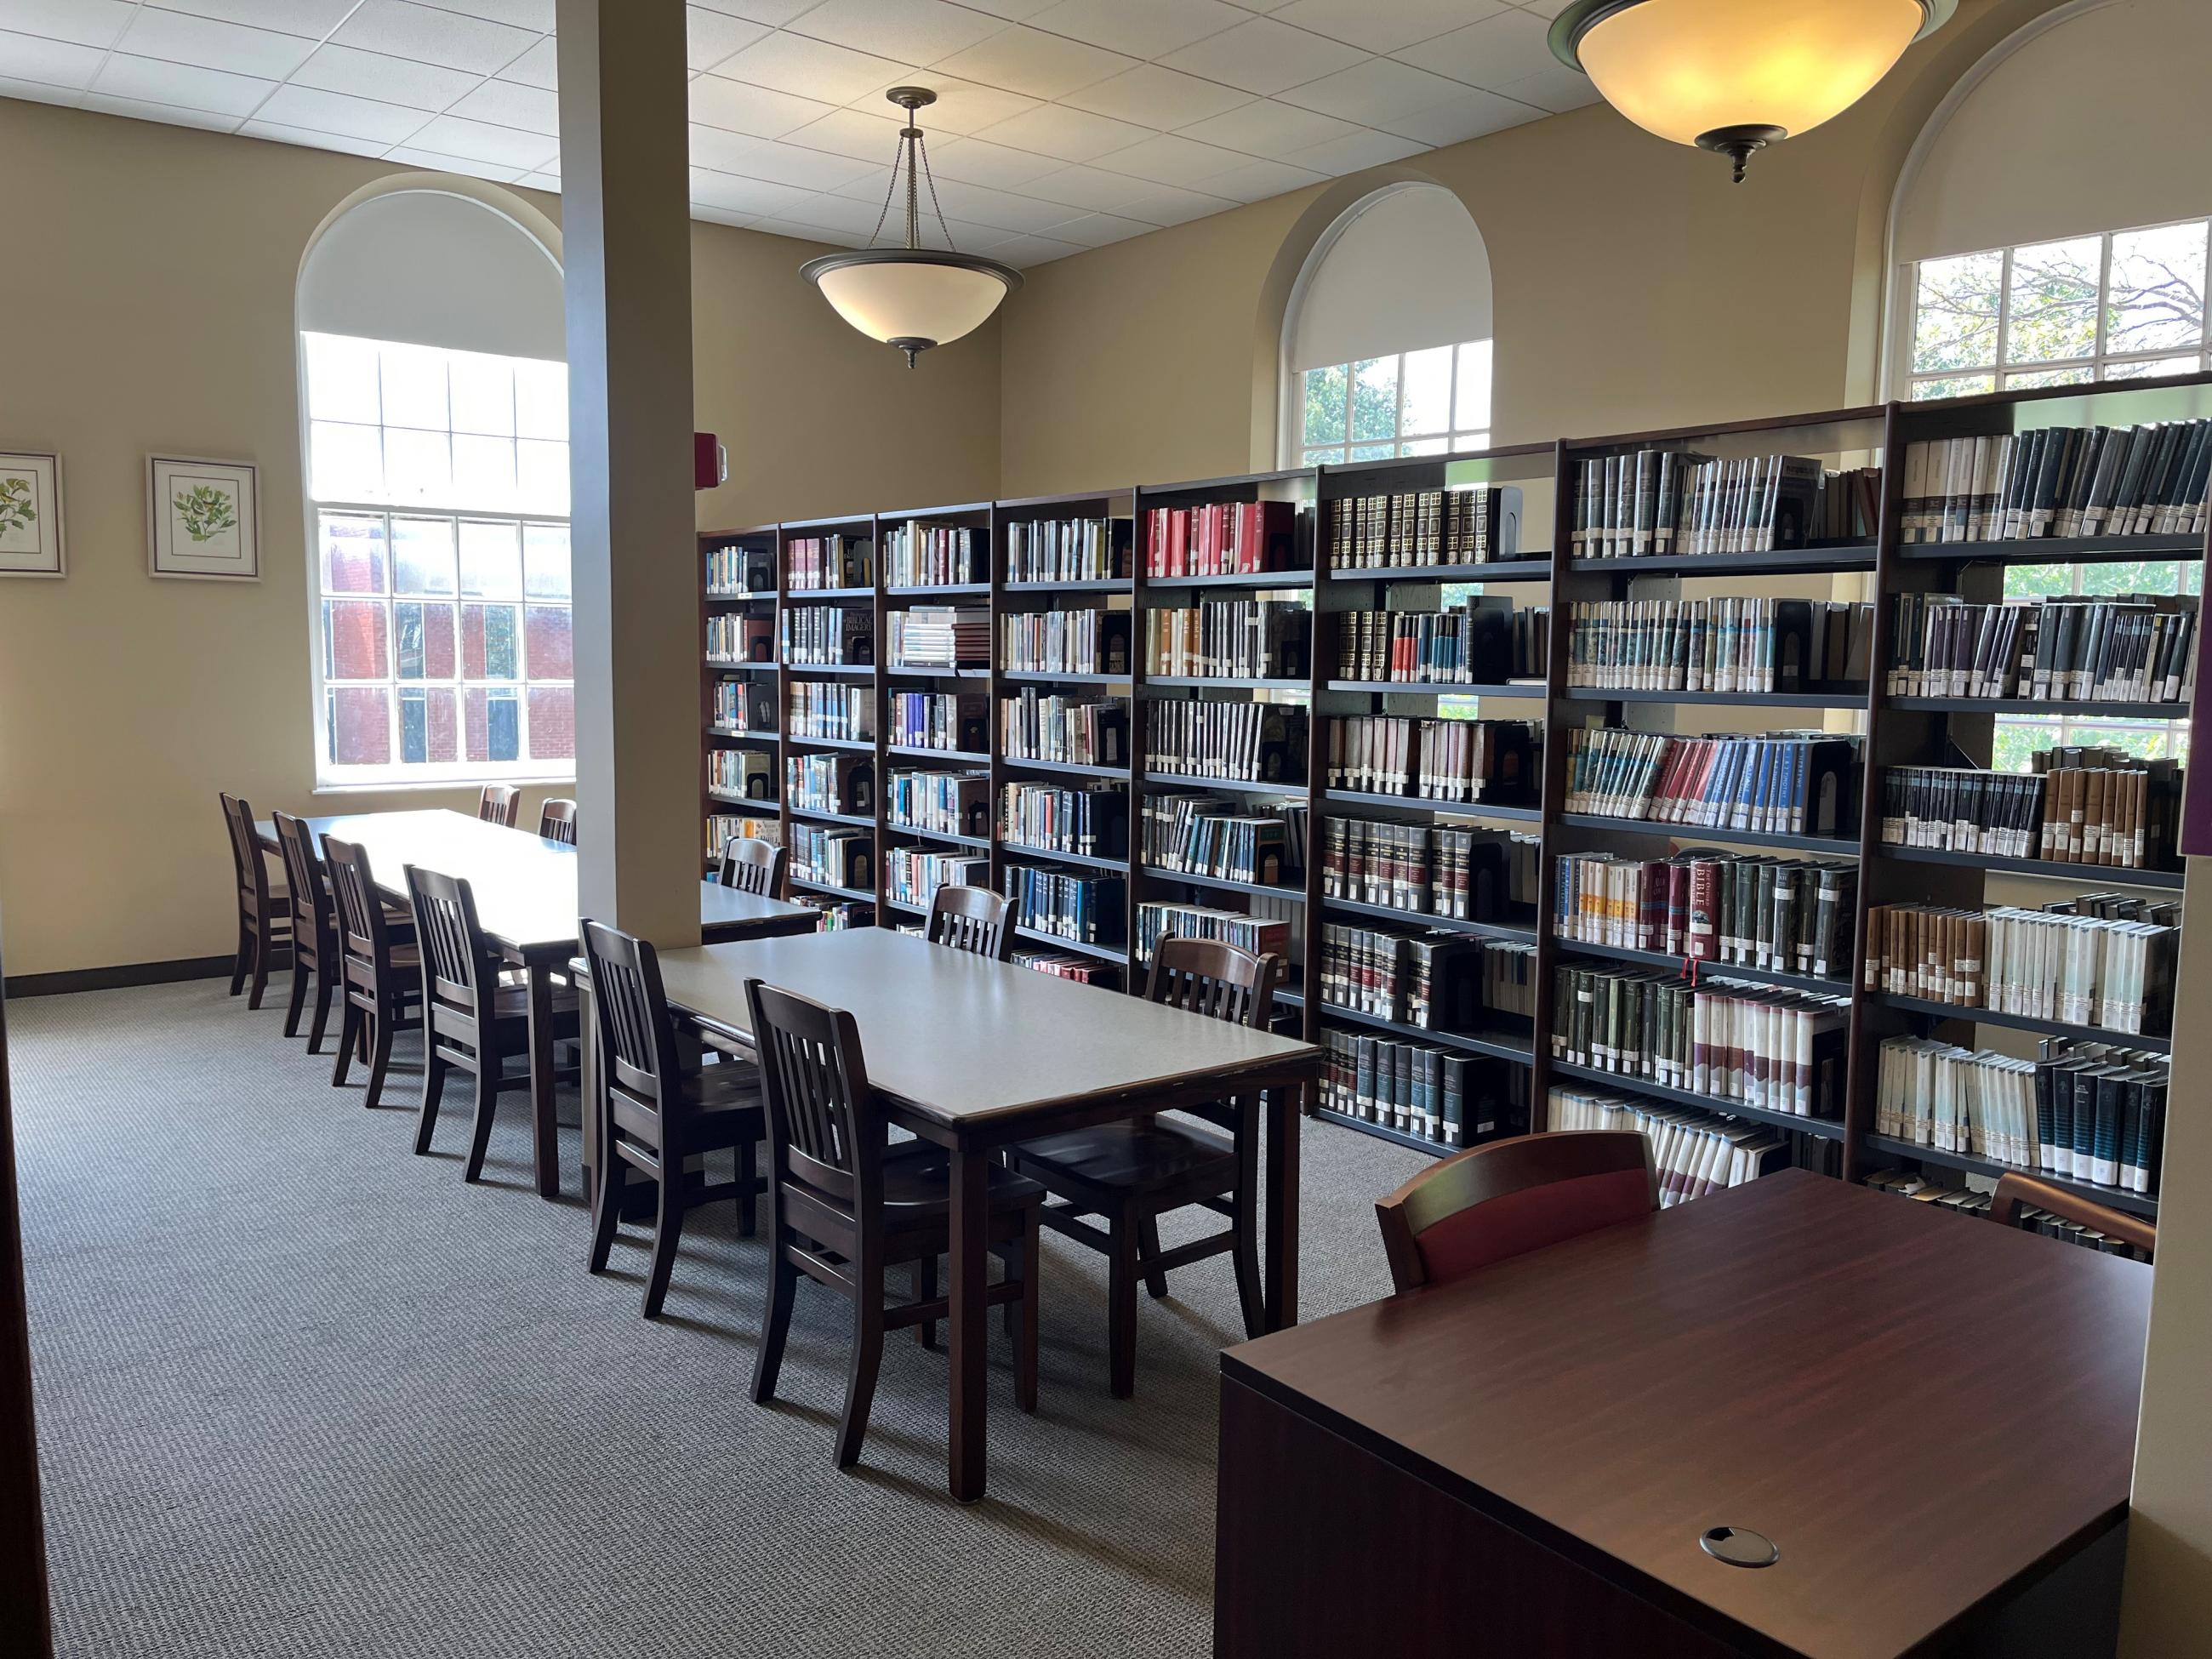 BMS Library Section Before Updates